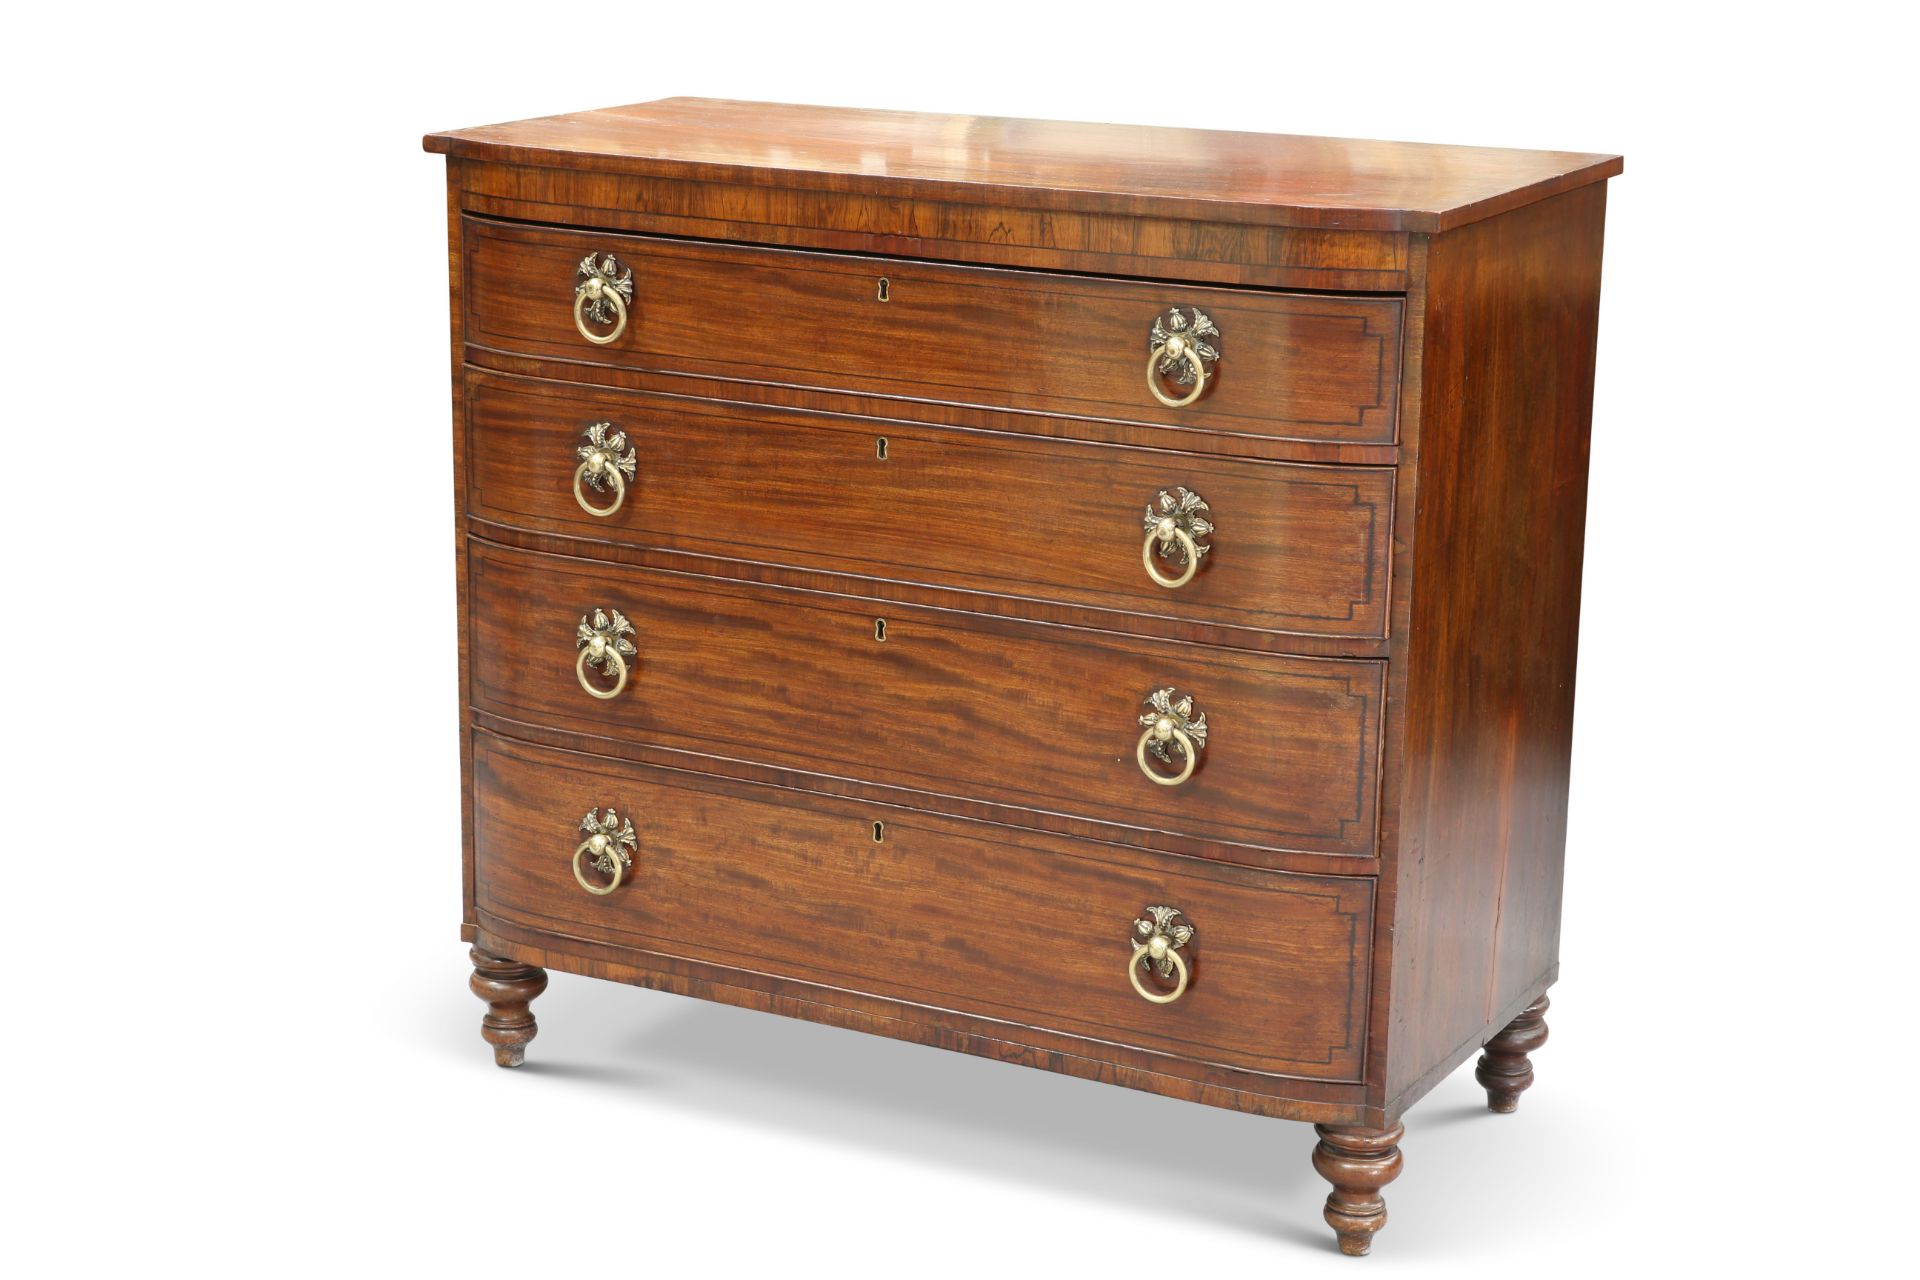 A REGENCY MAHOGANY AND ROSEWOOD CHEST OF DRAWERS